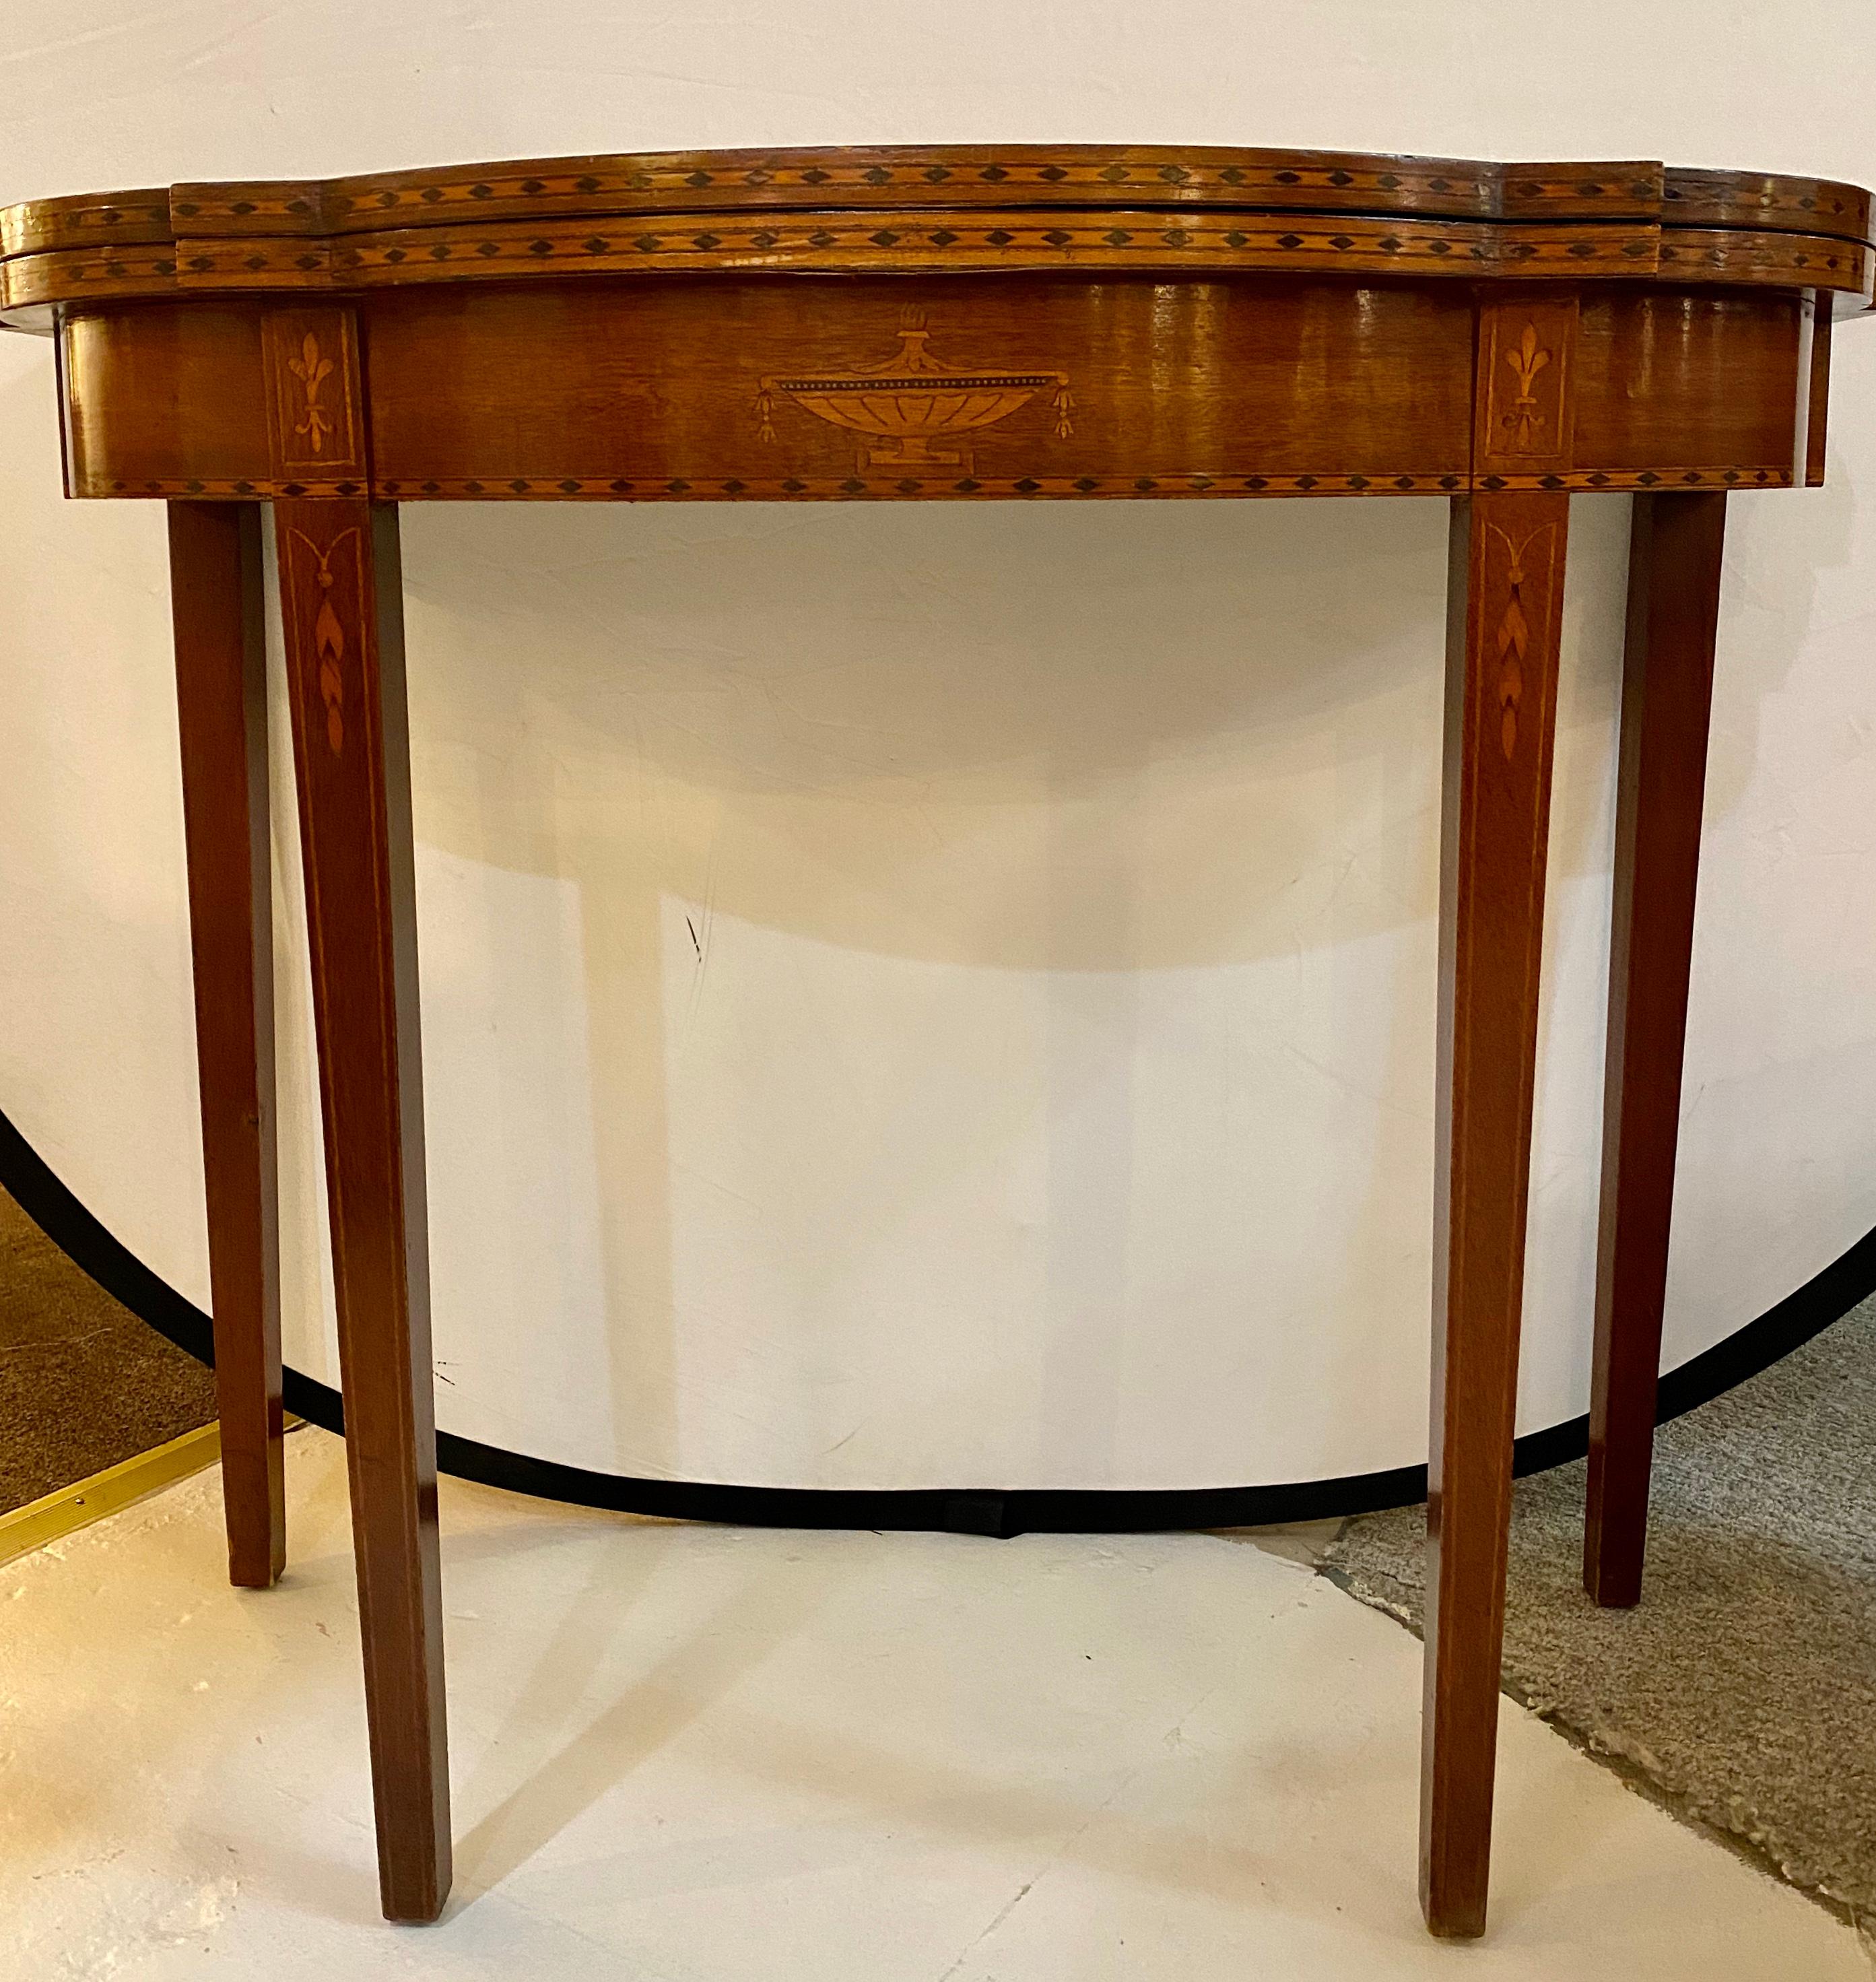 A federal style inlaid flip top card or games table demilune.
Opened table measures: 35.75 inches depth, 36 inches width, and 30.5 inches in height.